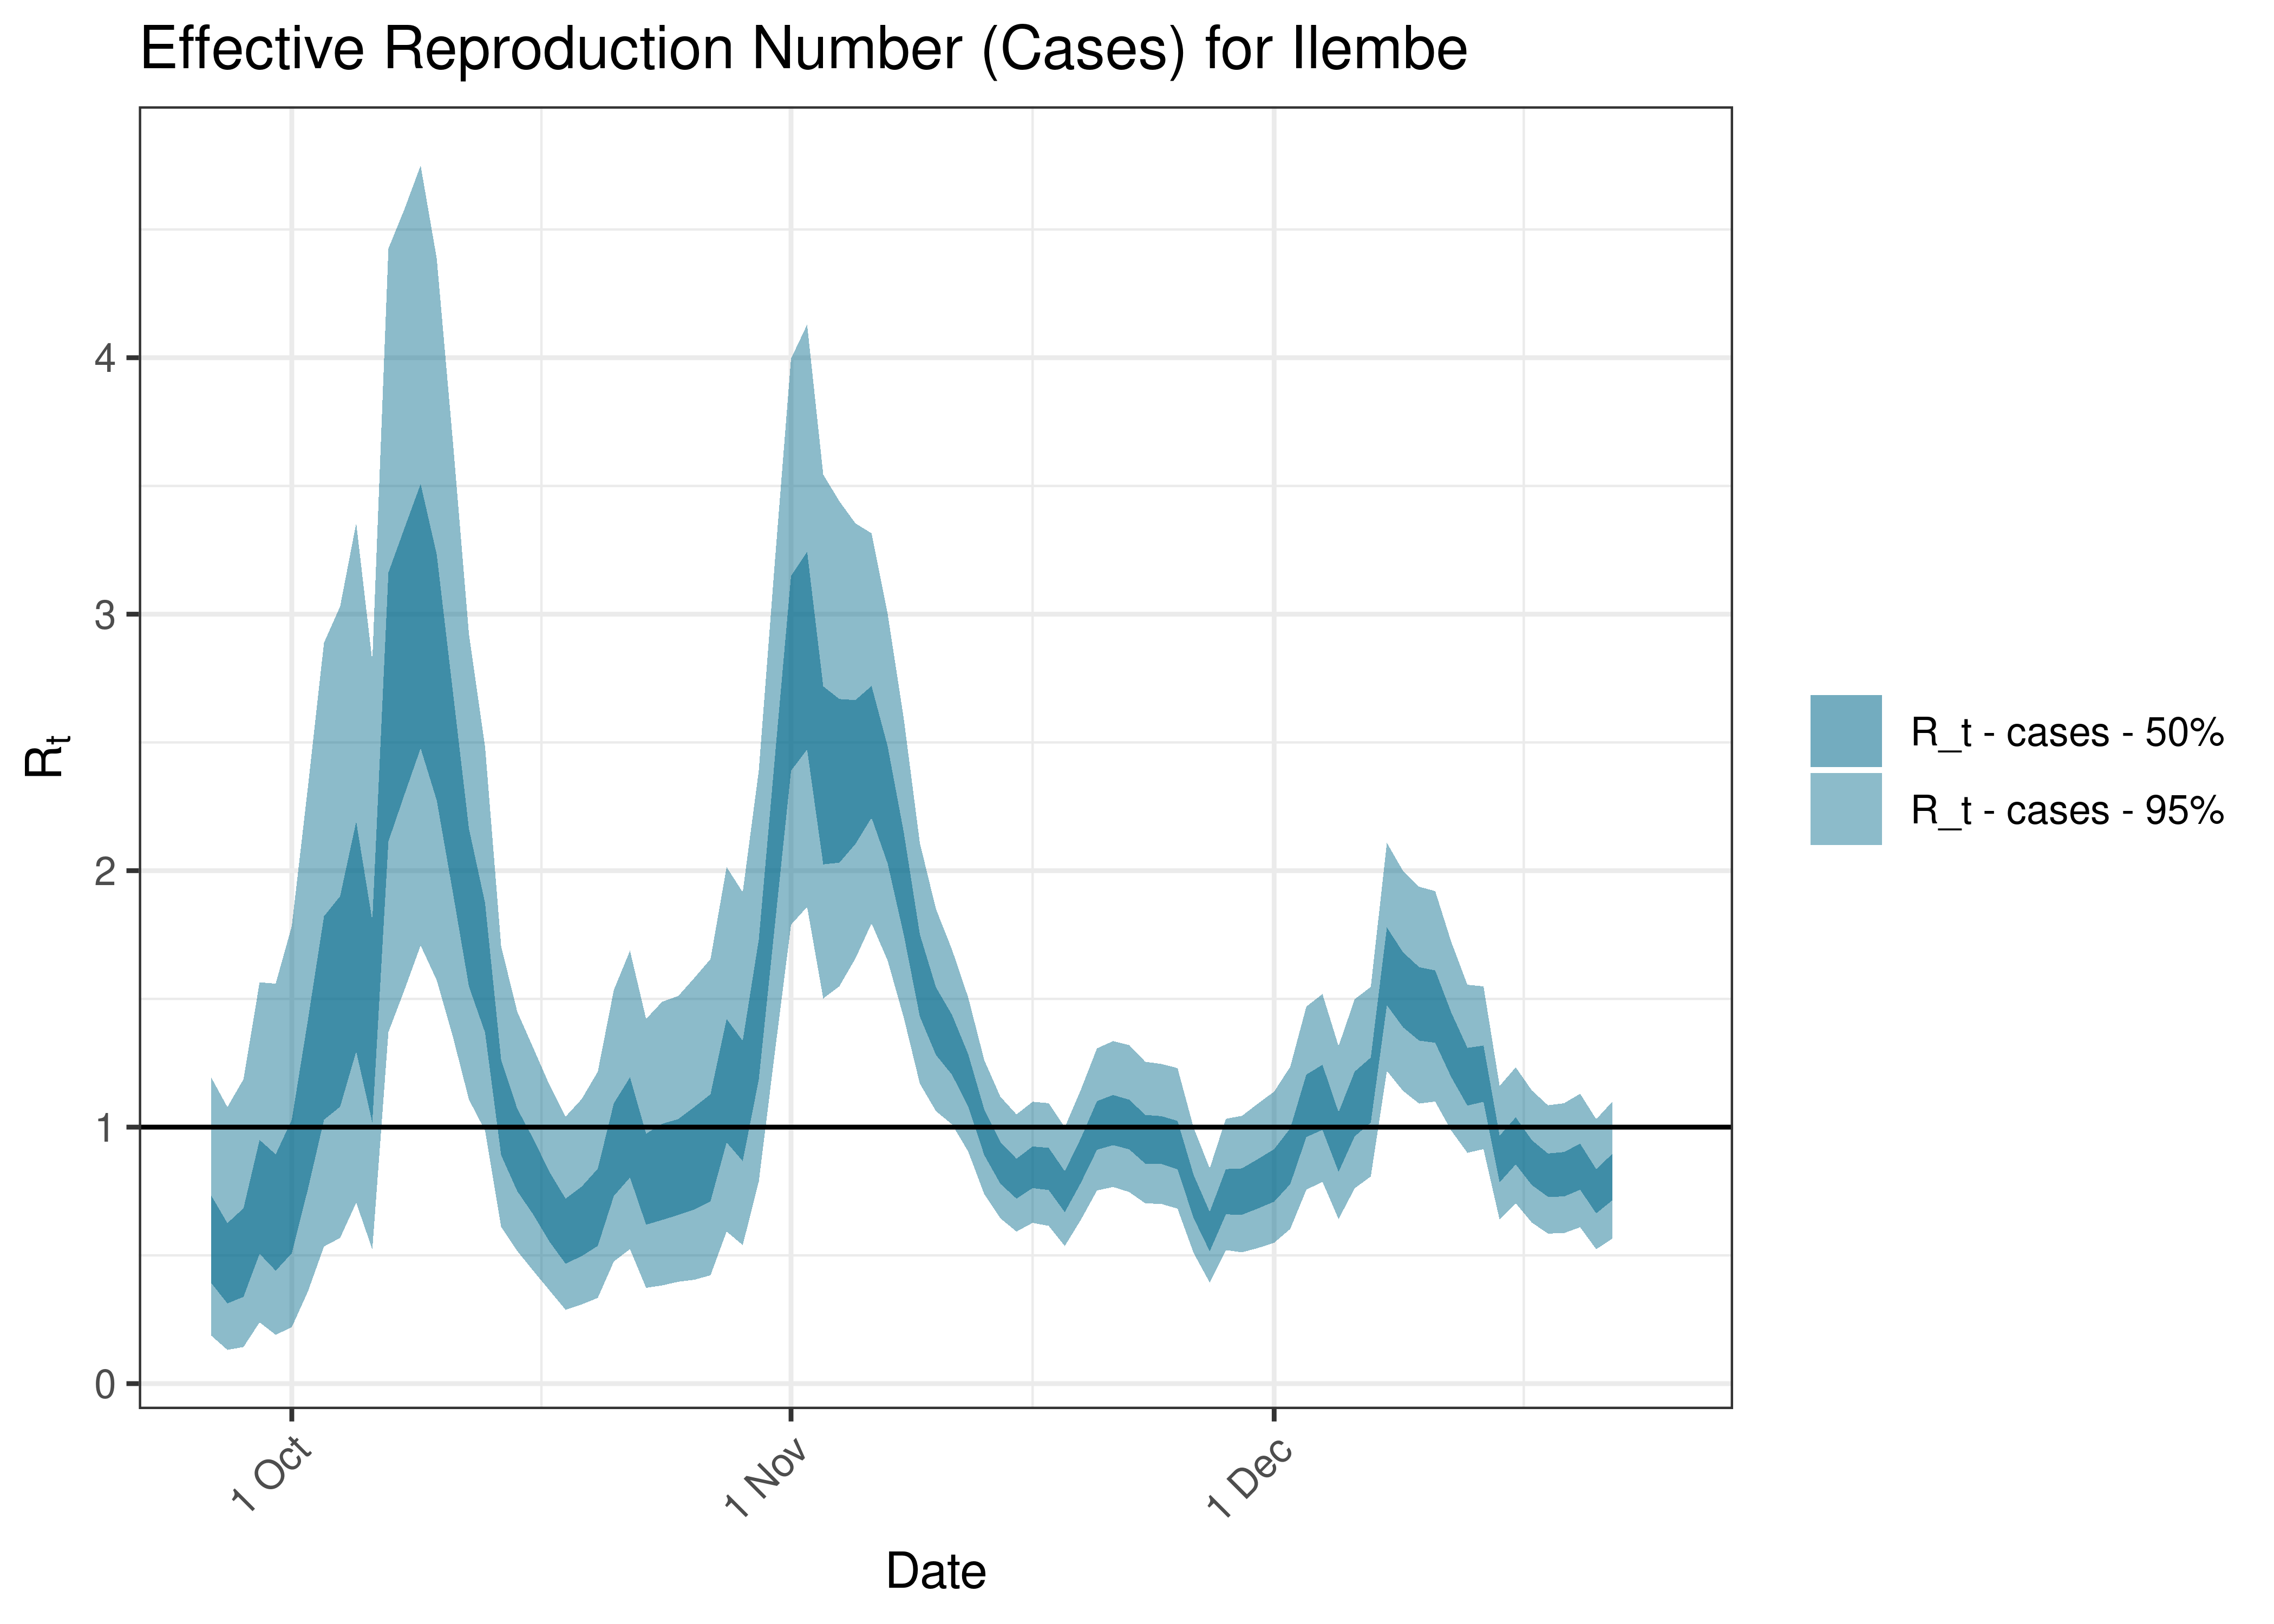 Estimated Effective Reproduction Number Based on Cases for Ilembe over last 90 days